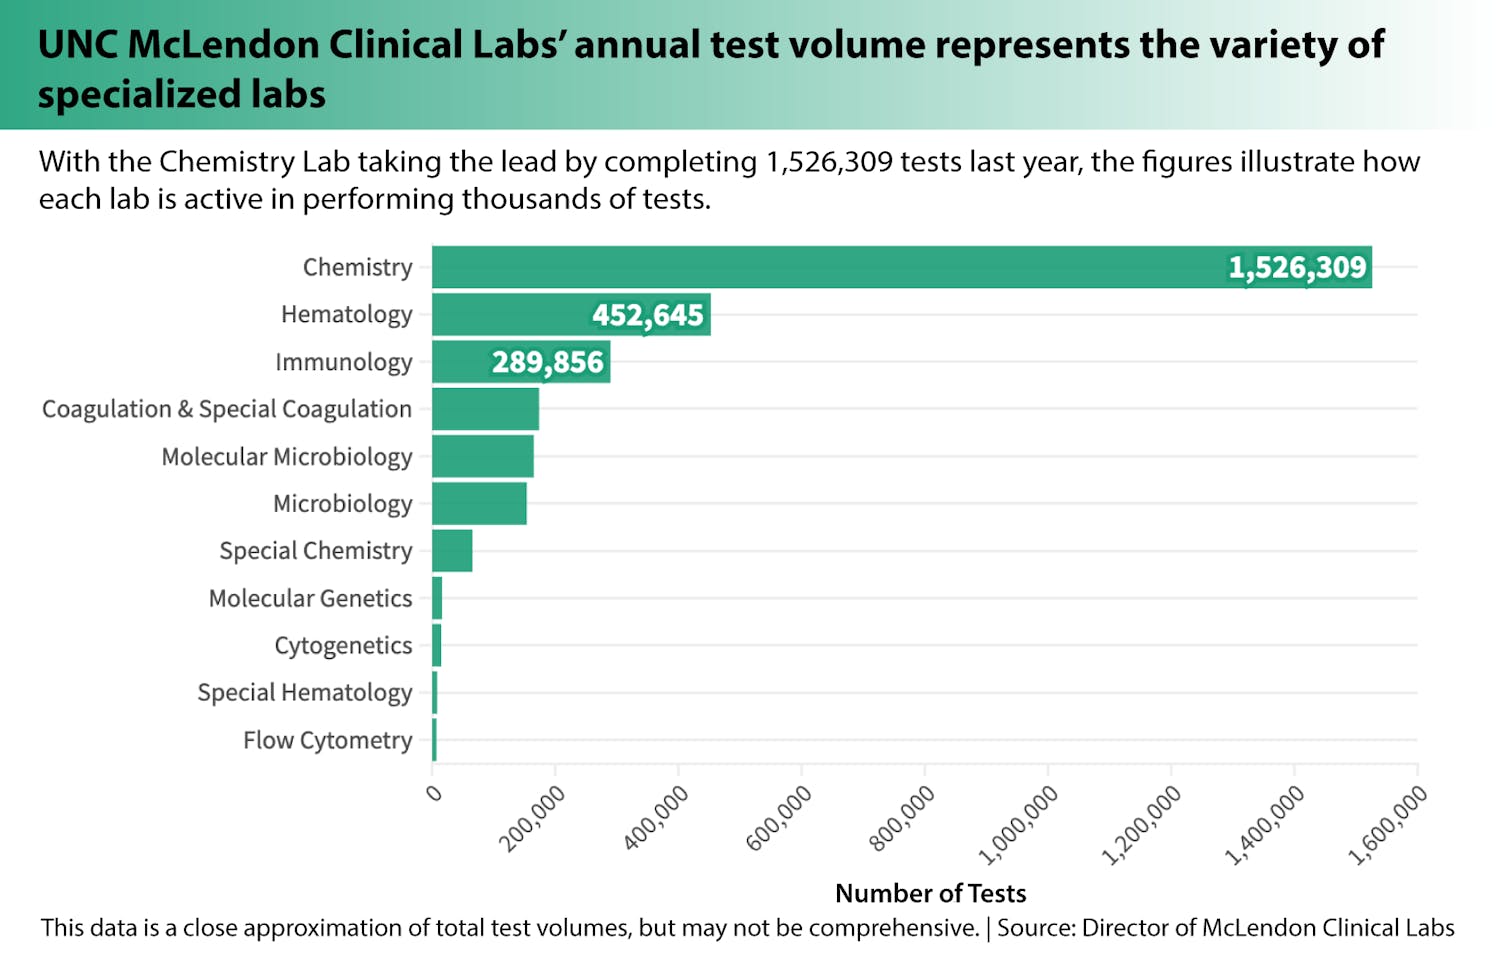 UNC McLendon Clinical Labs' annual test volume represents the variety of specialized labs